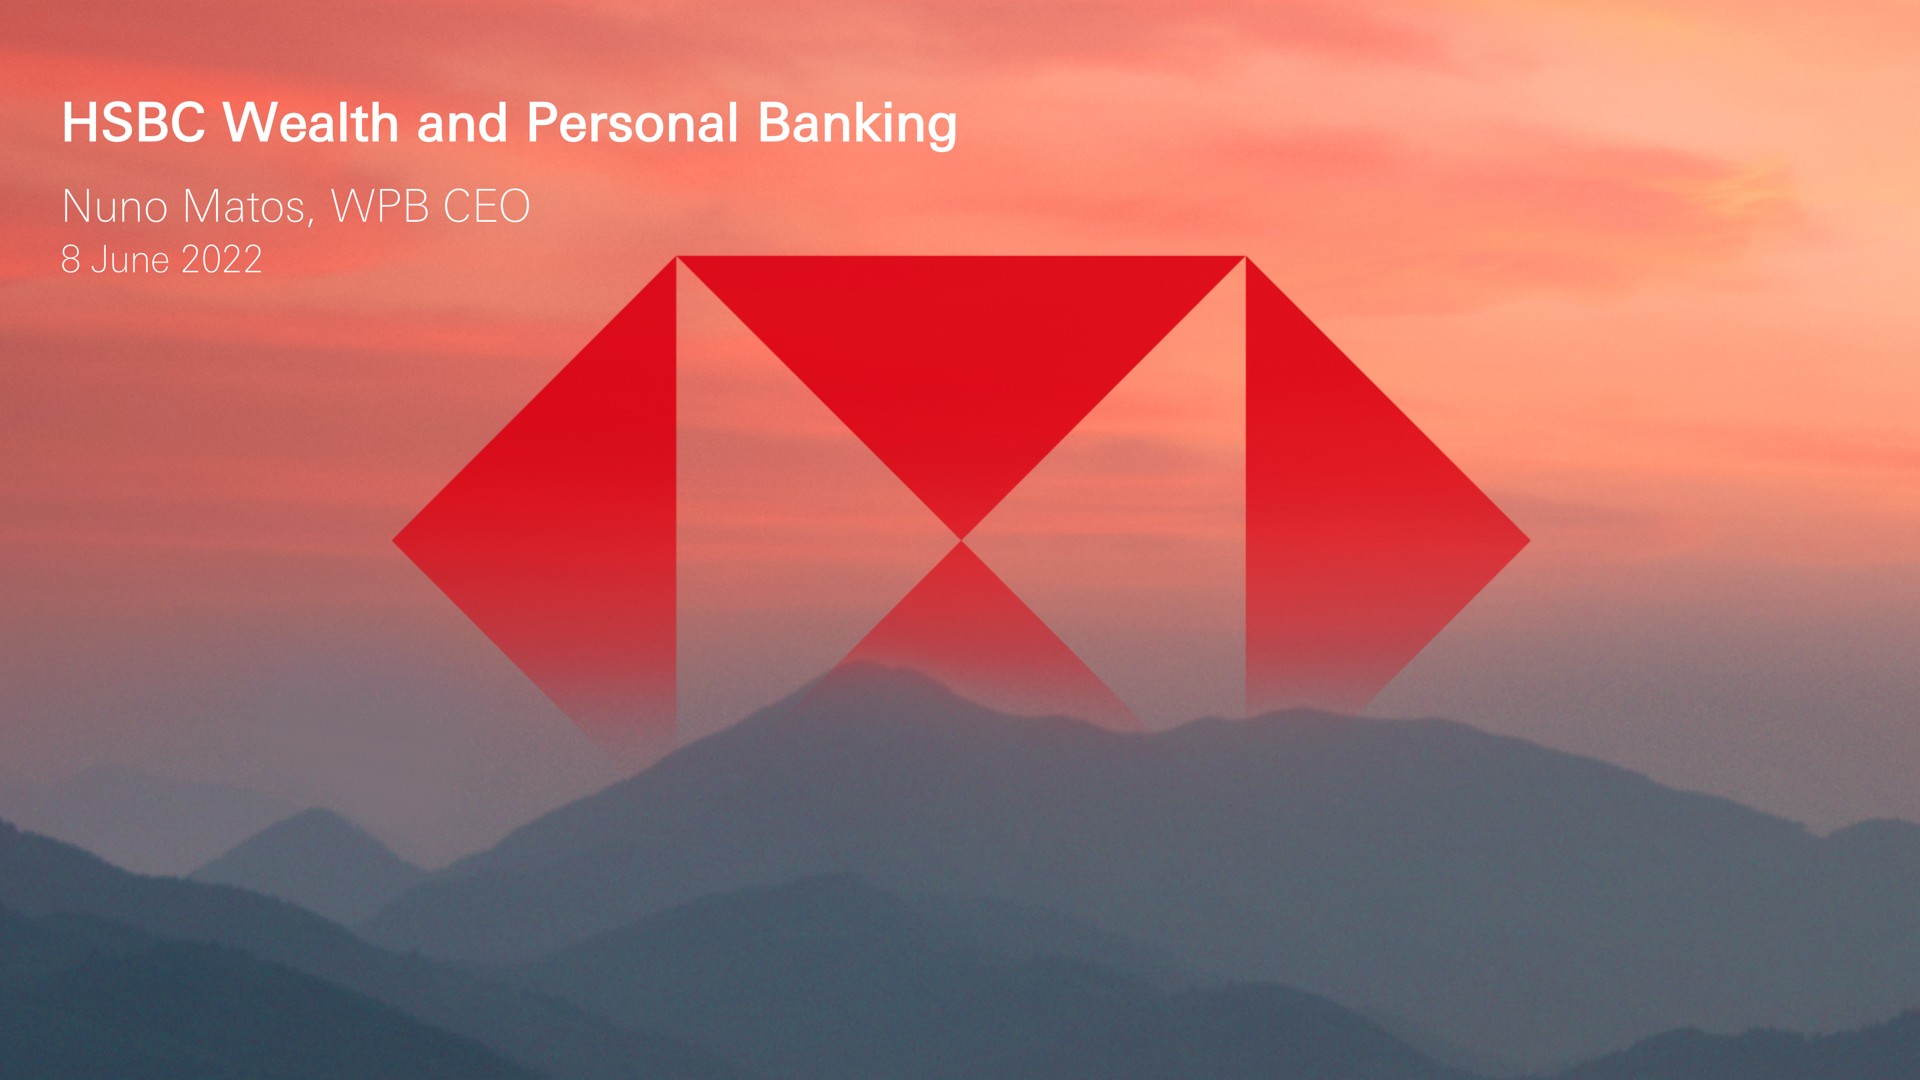 wealth and personal banking | HSBC